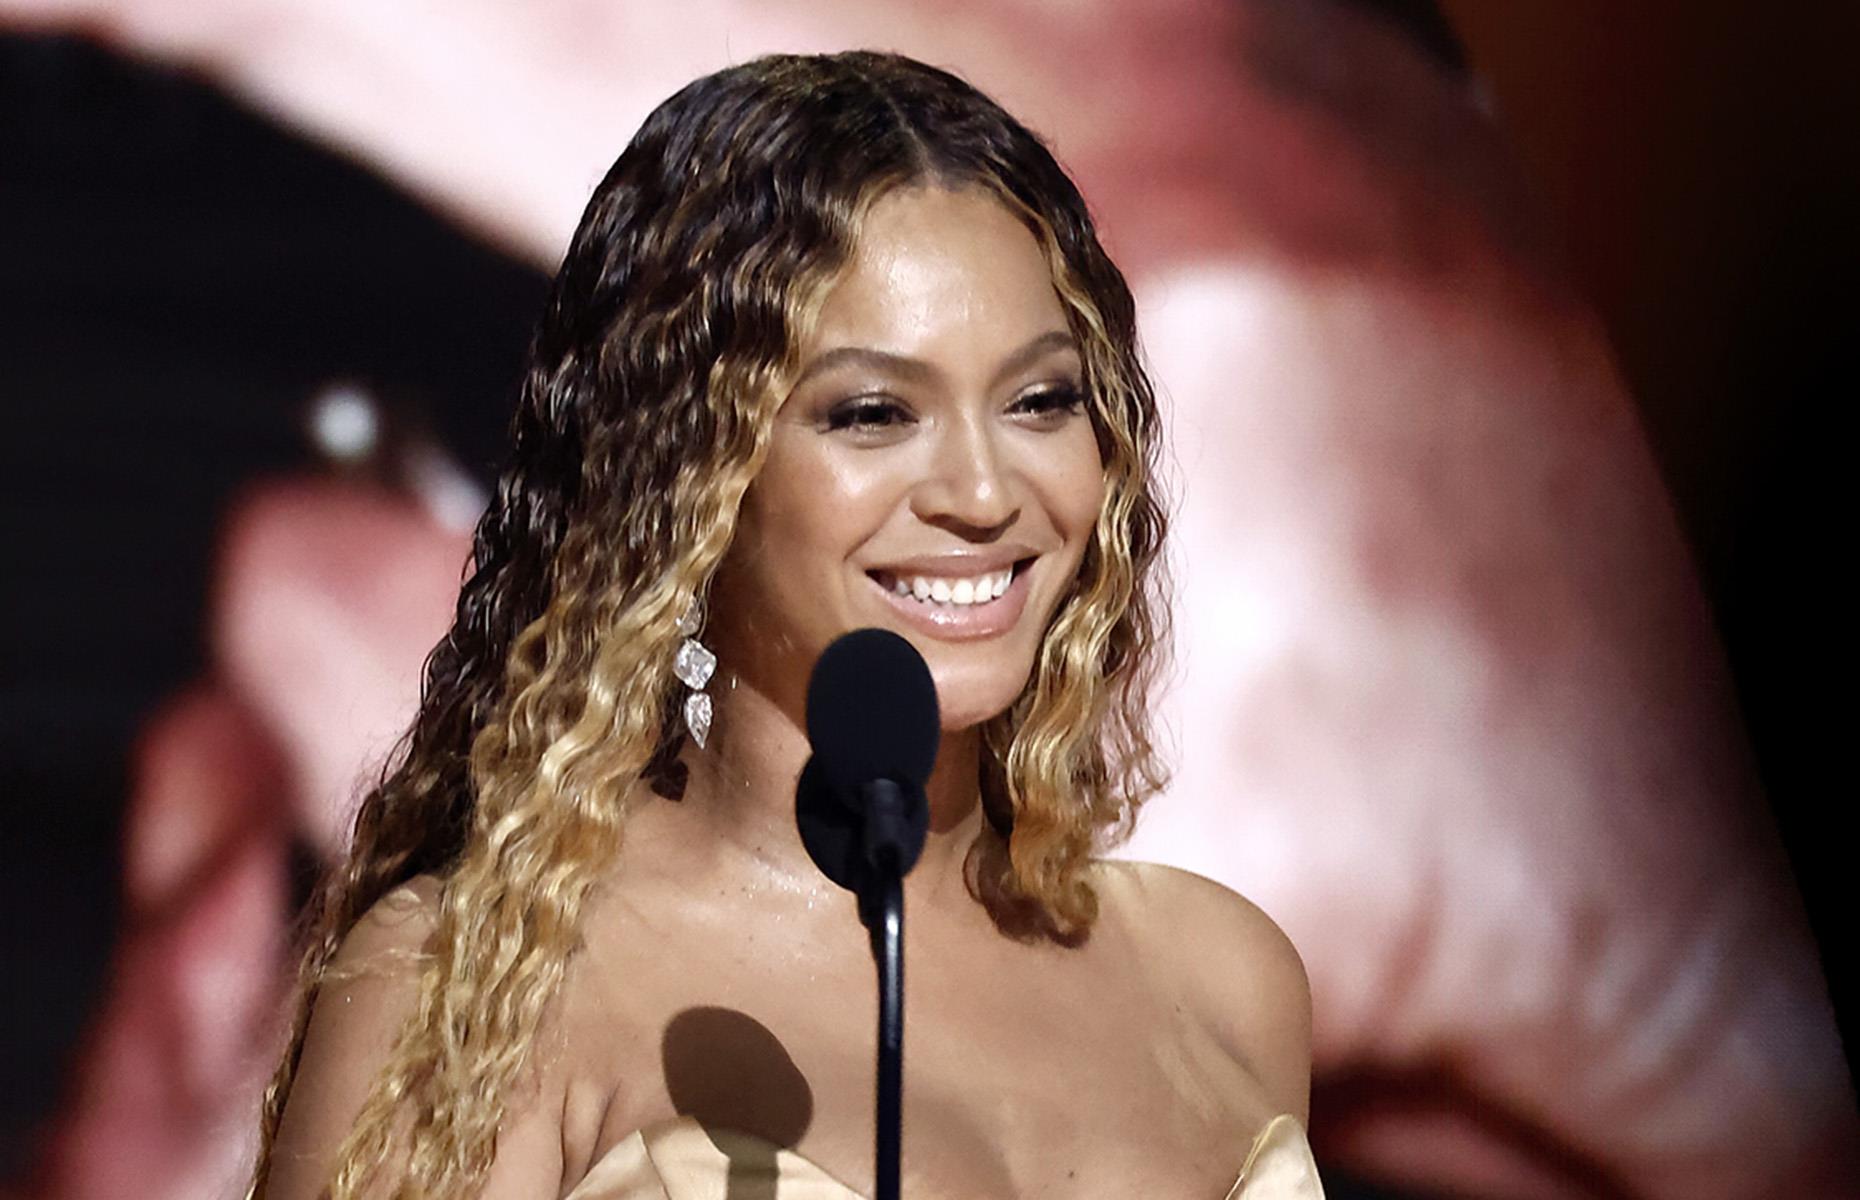 <p>Beyoncé just made history as the artist with the most Grammy wins after scoring her 32nd Grammy Award at the 2023 ceremony. The pop diva took home four awards overall, including that for best dance/electronic album for latest album <em>Renaissance</em>.</p>  <p>Beyoncé's record-breaking victory means that she defeated Hungarian-British conductor George Solti, whose record of 31 Grammys had stood for more than 20 years. </p>